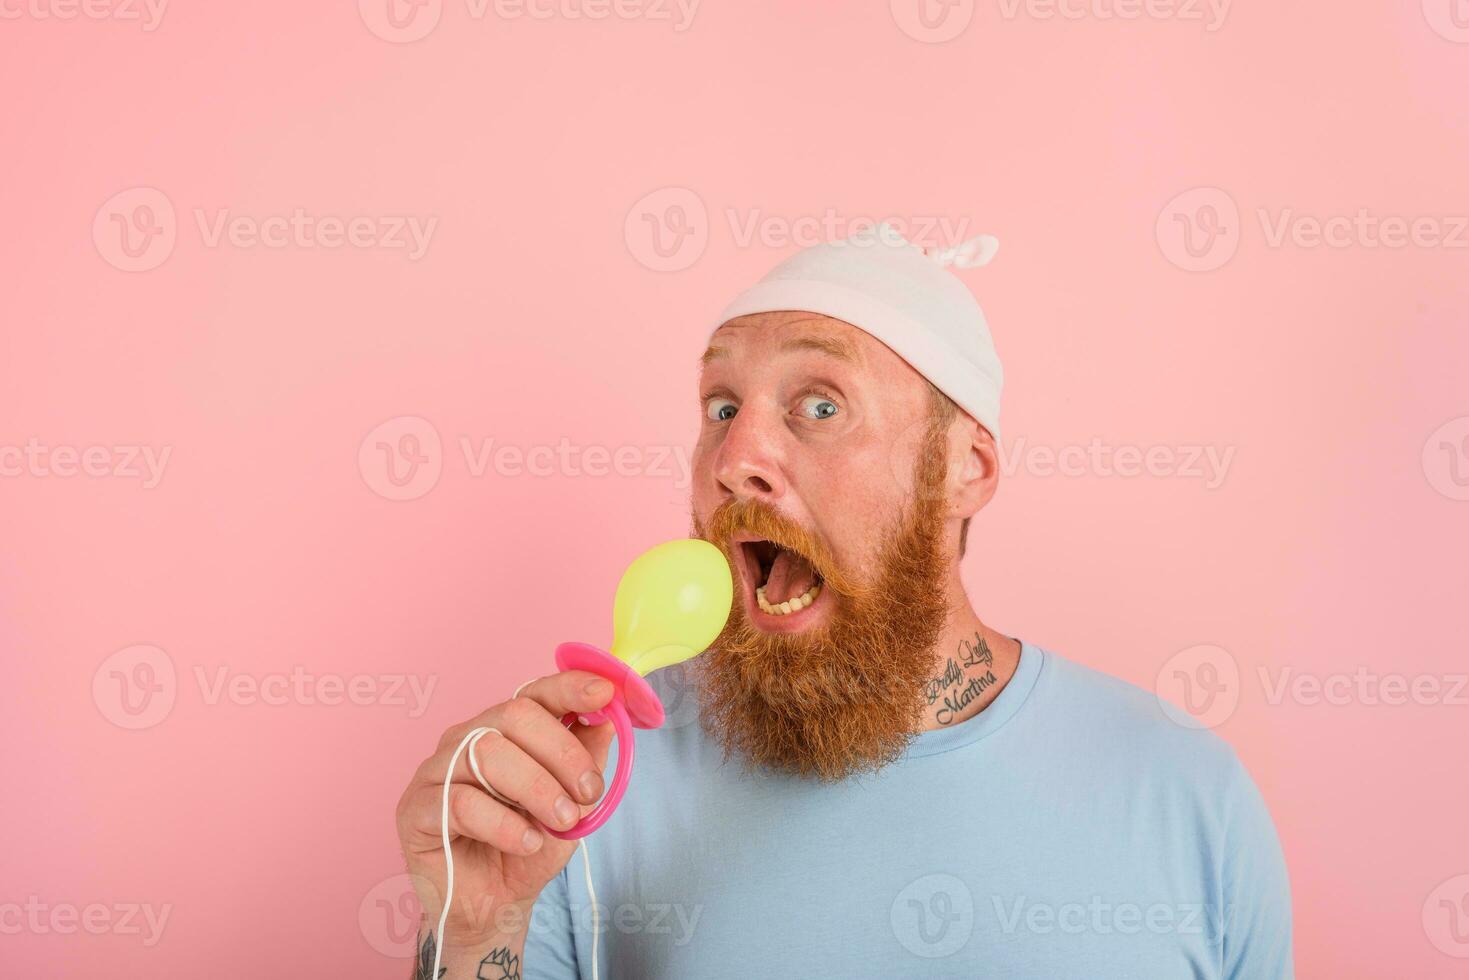 Man with beard and tattoos acts like a little newborn baby with pacifier in hand photo